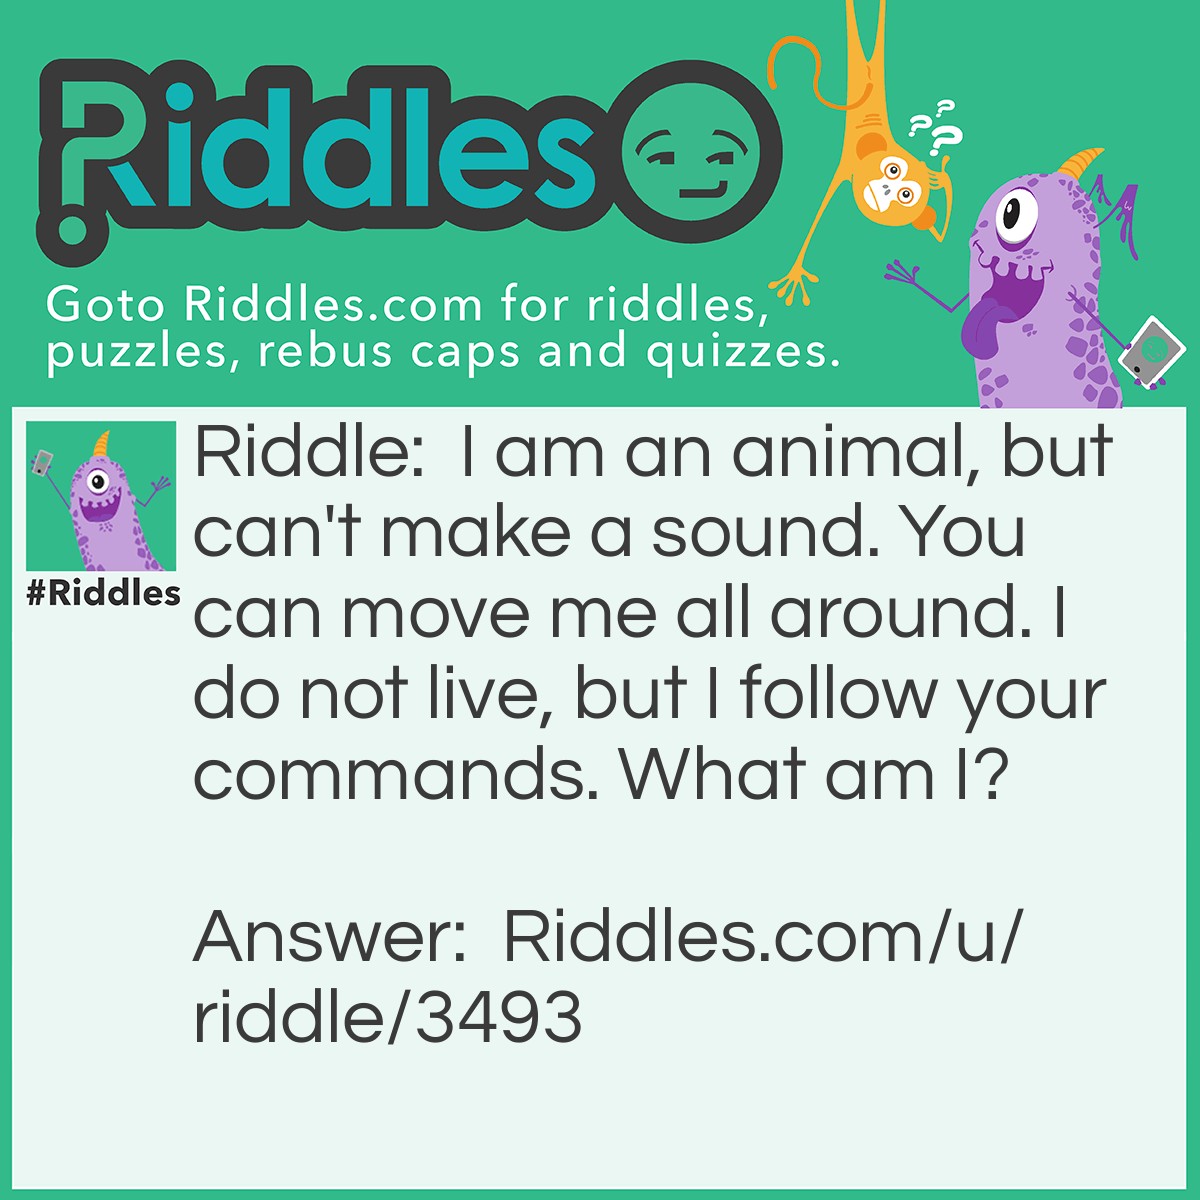 Riddle: I am an animal, but can't make a sound. You can move me all around. I do not live, but I follow your commands. What am I? Answer: A mouse!